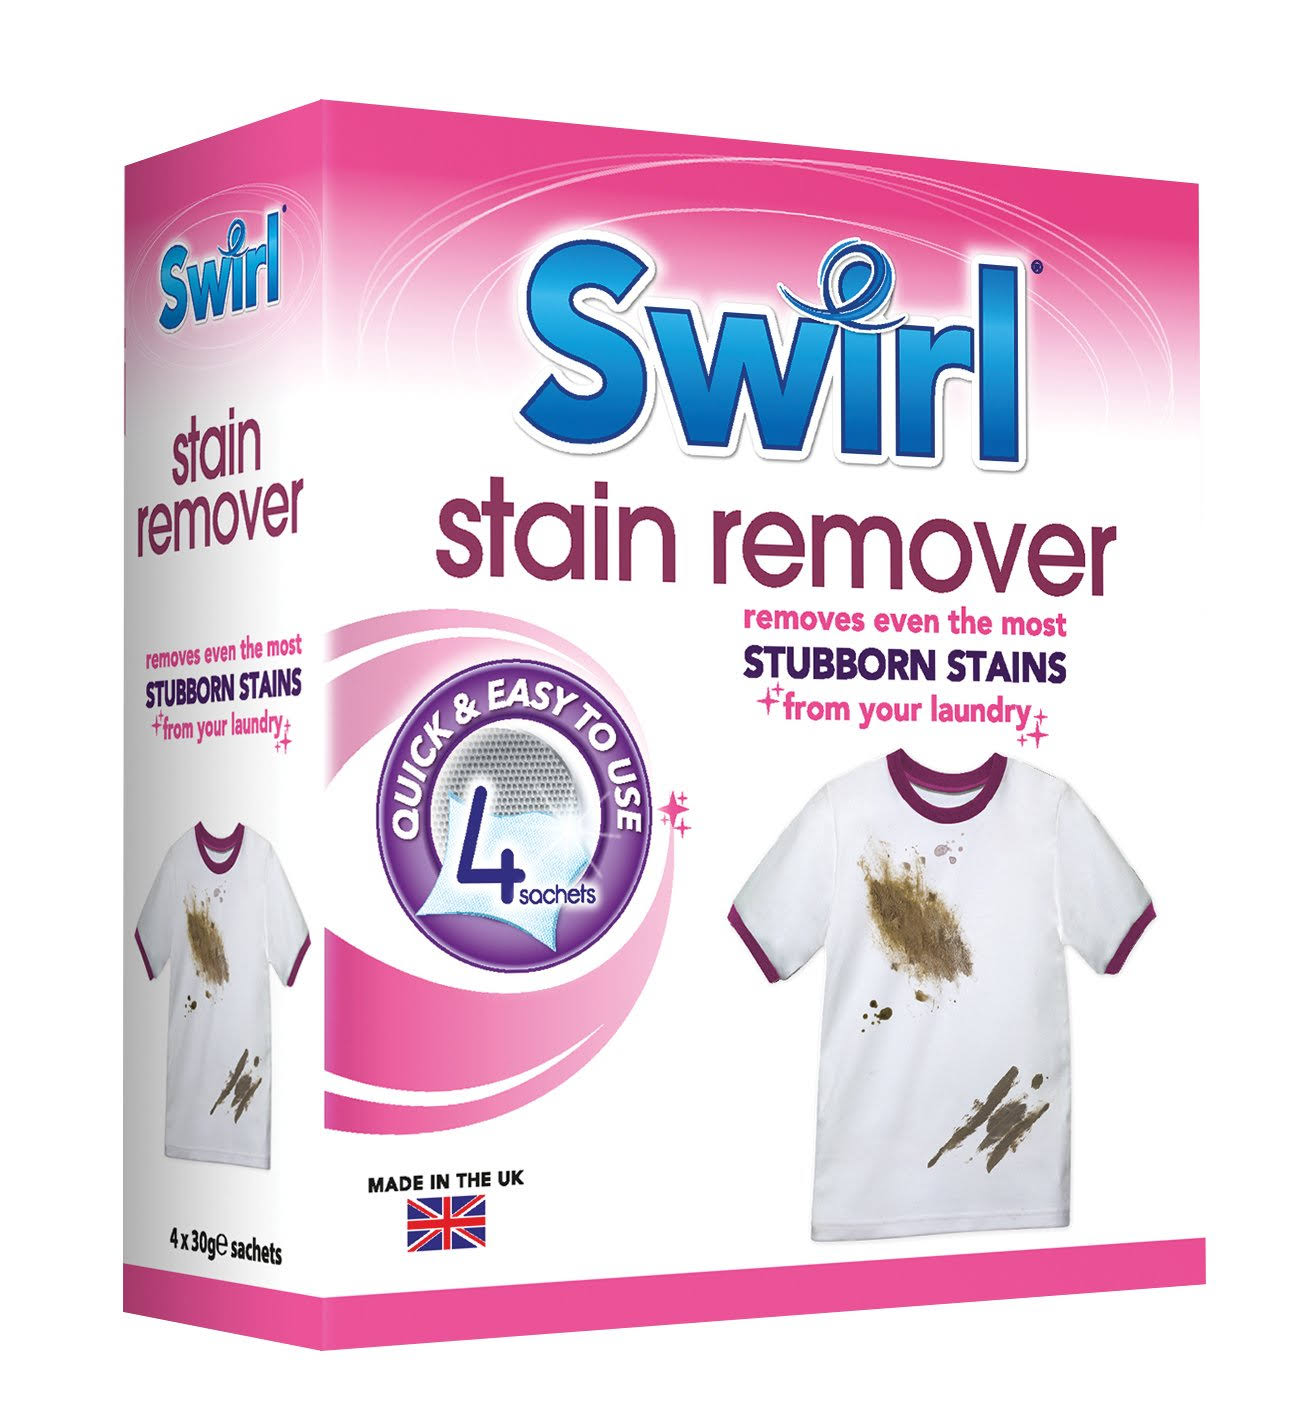 Swirl Stain Remover